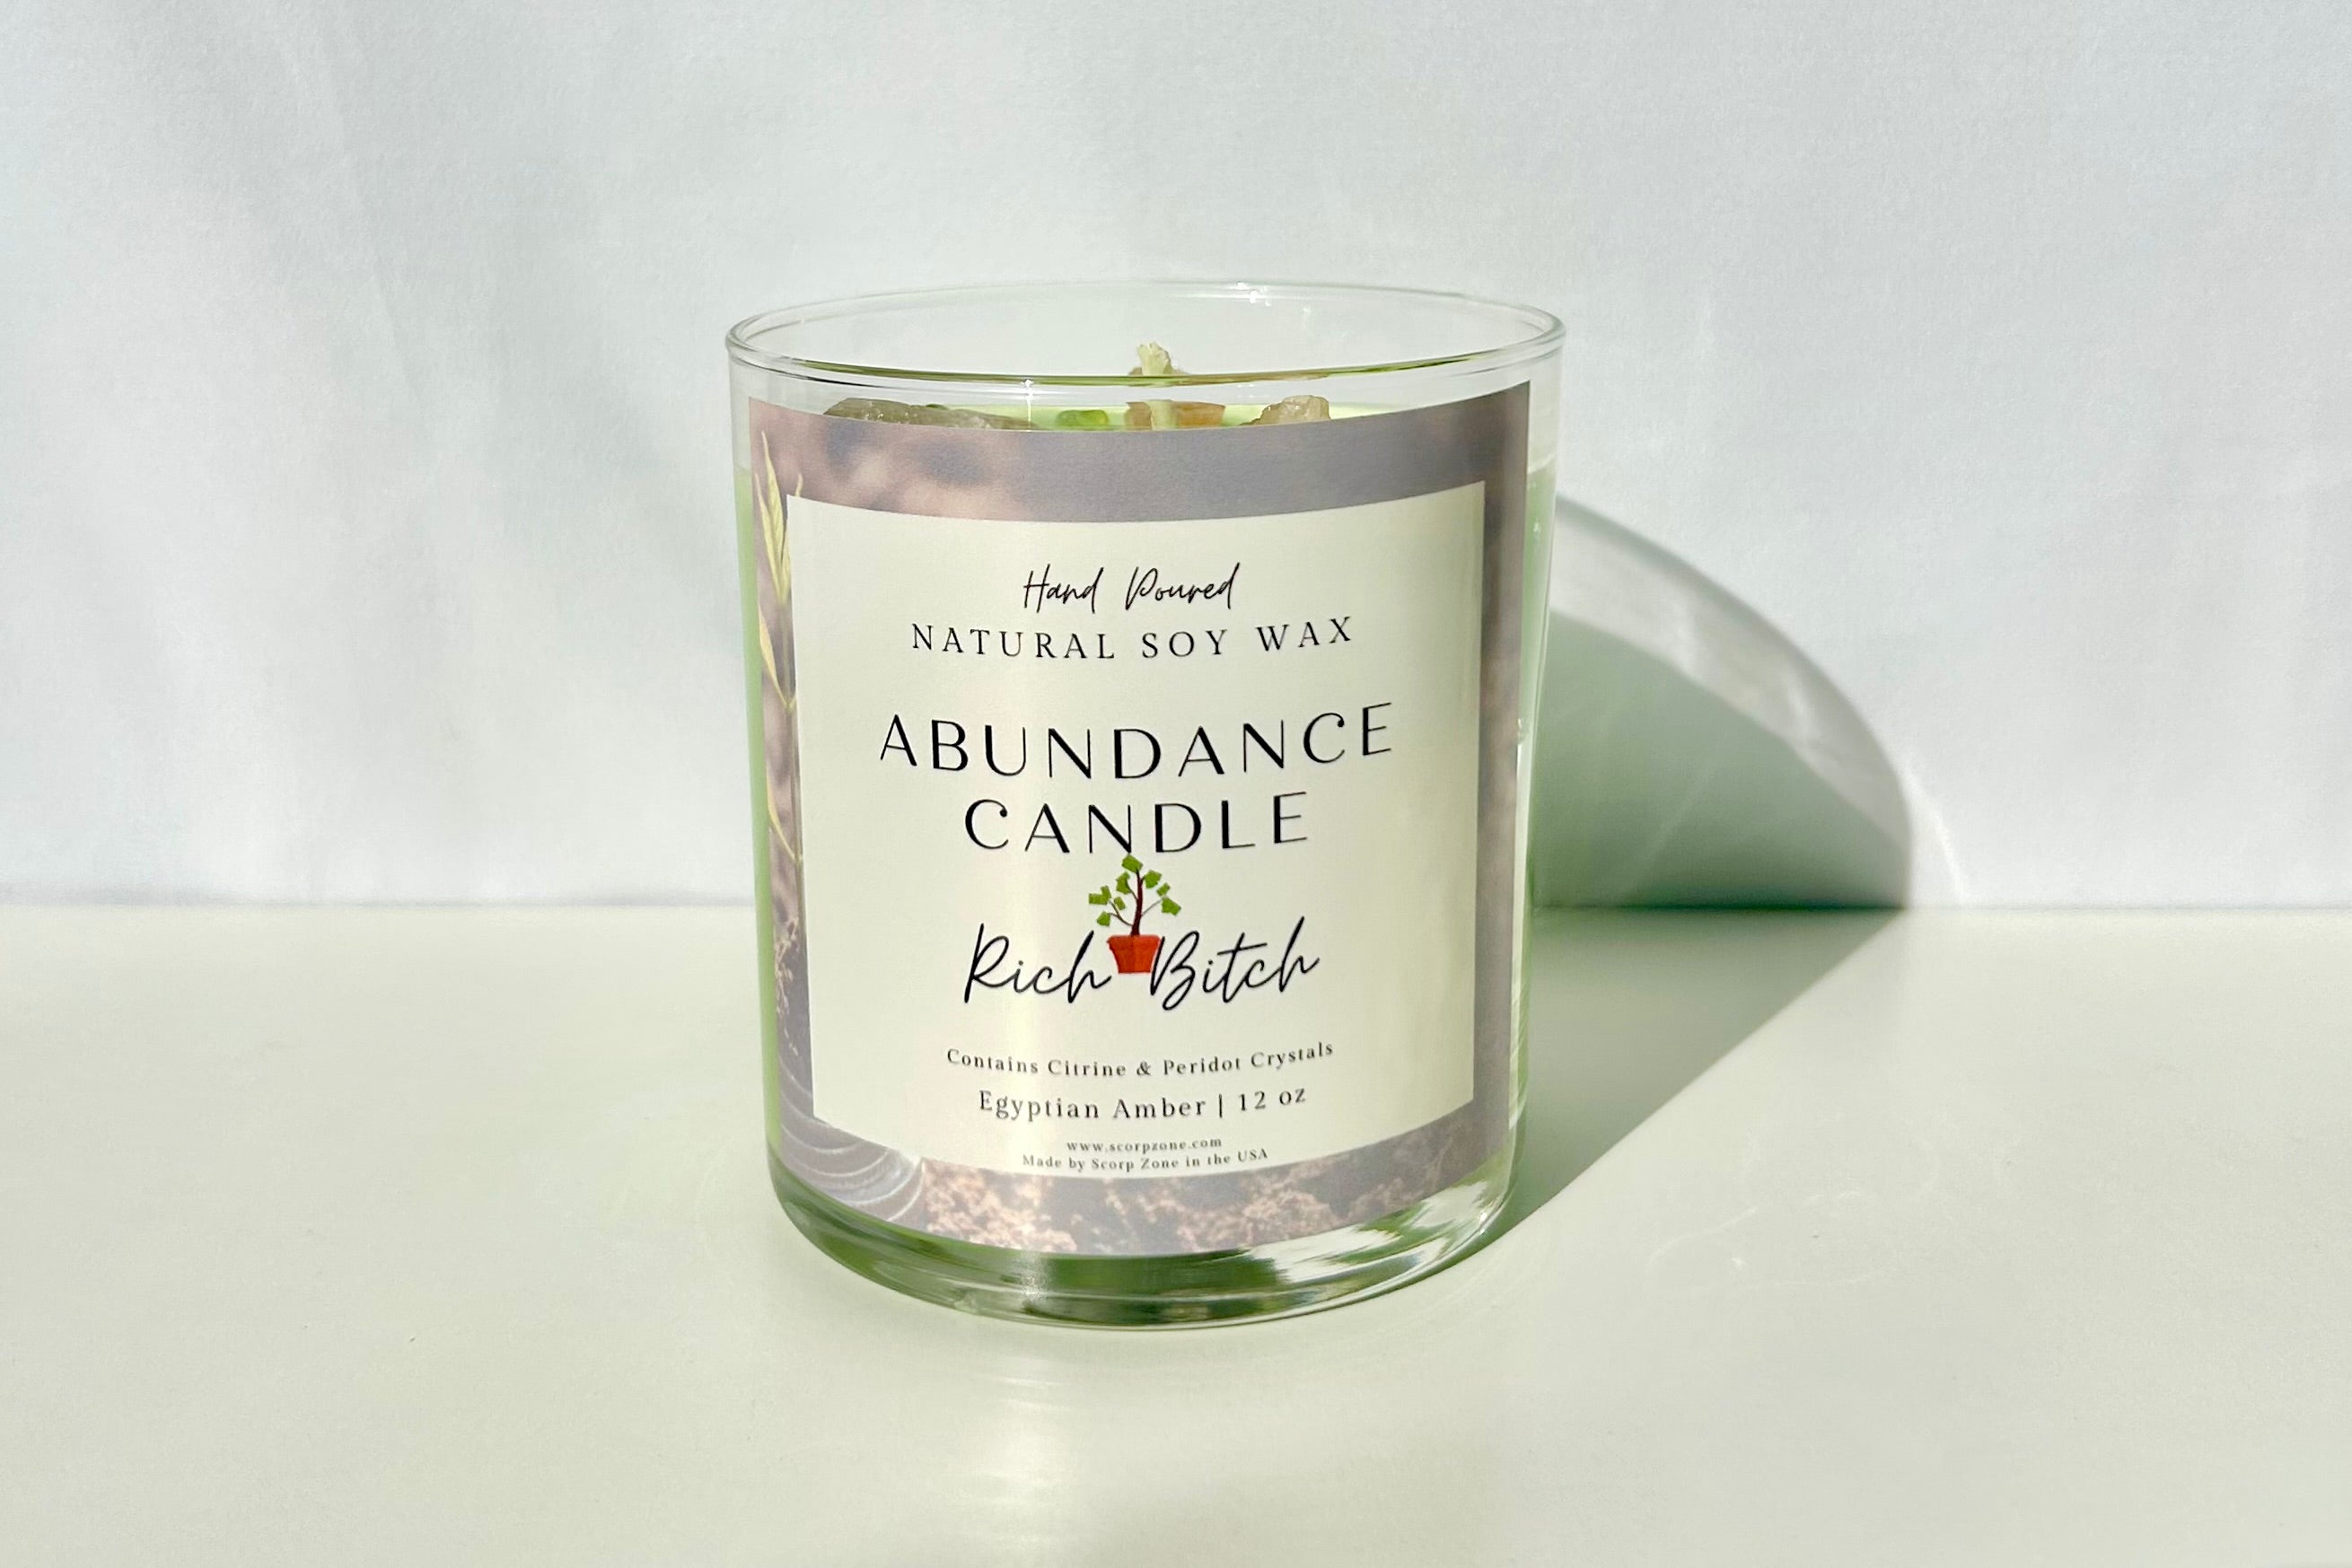 Abundance Crystal Soy Wax Candle by Scorp Zone